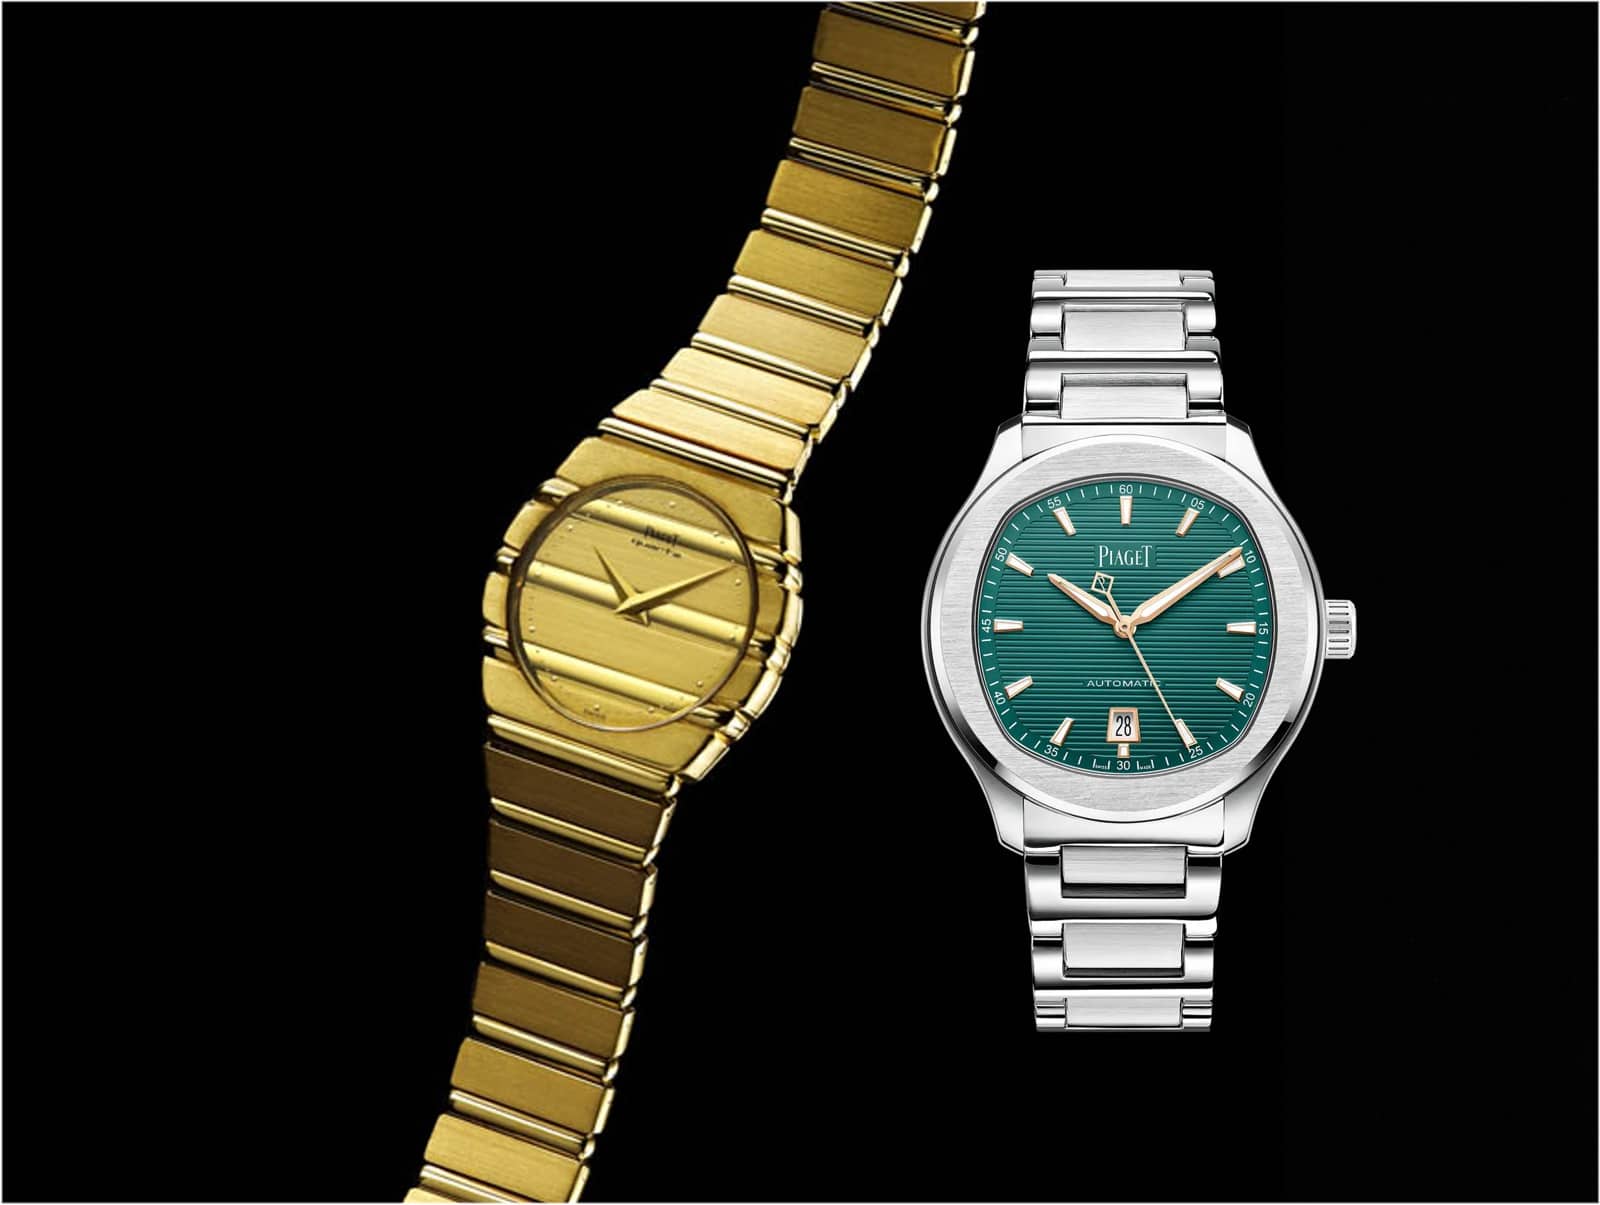 Piaget Polo Gold und Piaget Polo S 